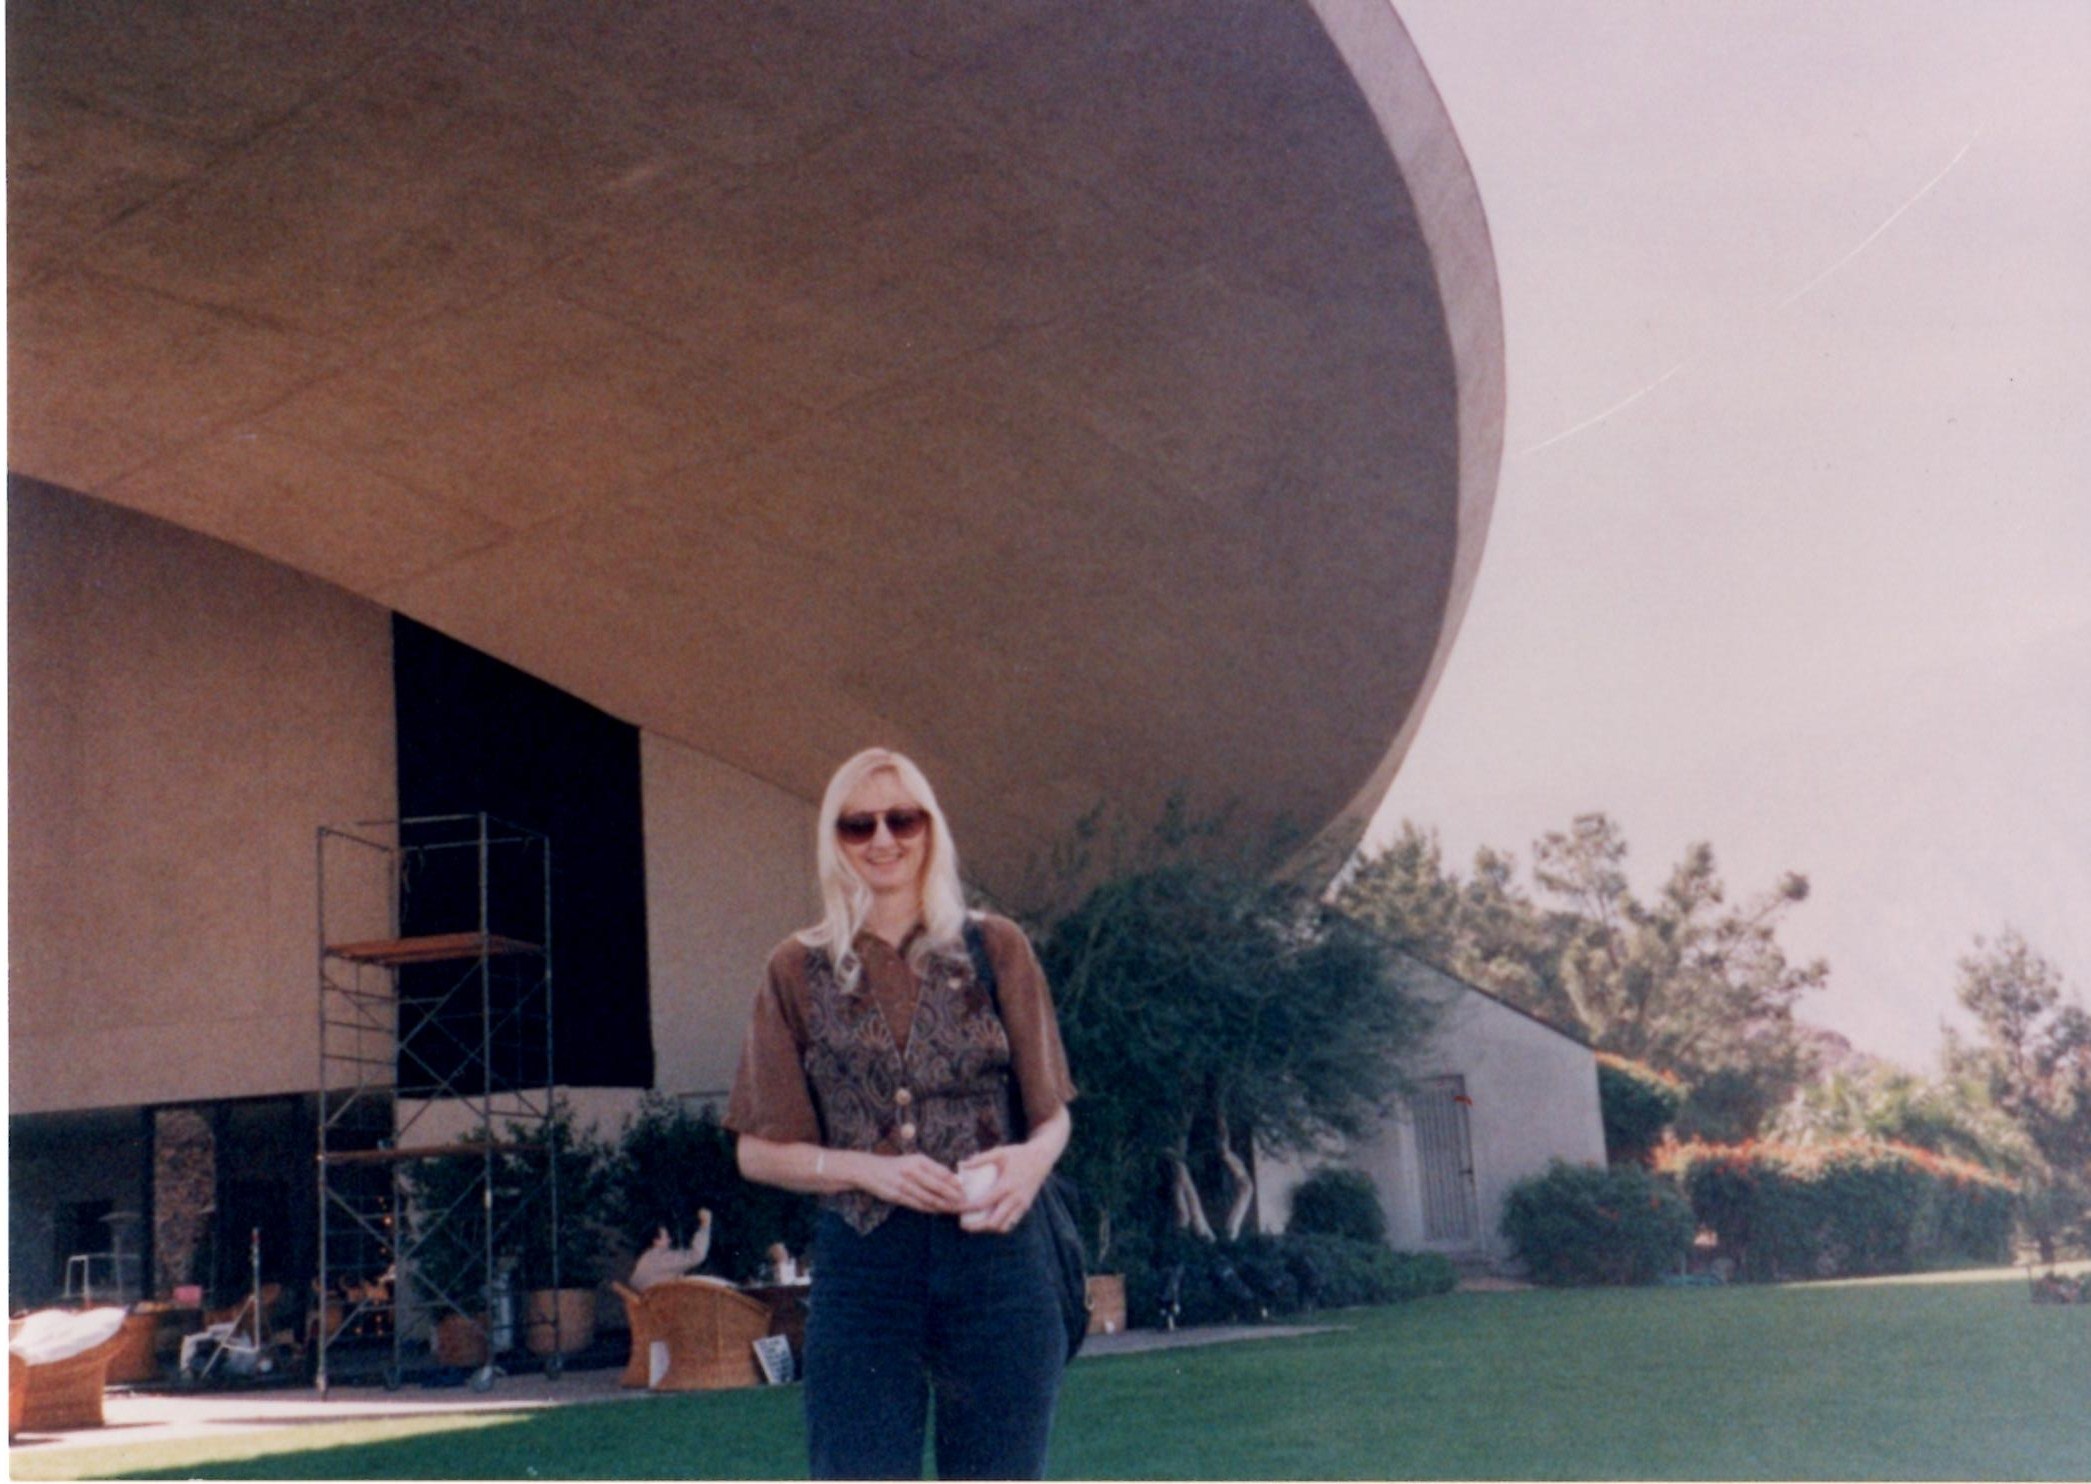 On set of Bob Hope's Yellow Ribbon TV special taped at his Palm Springs home